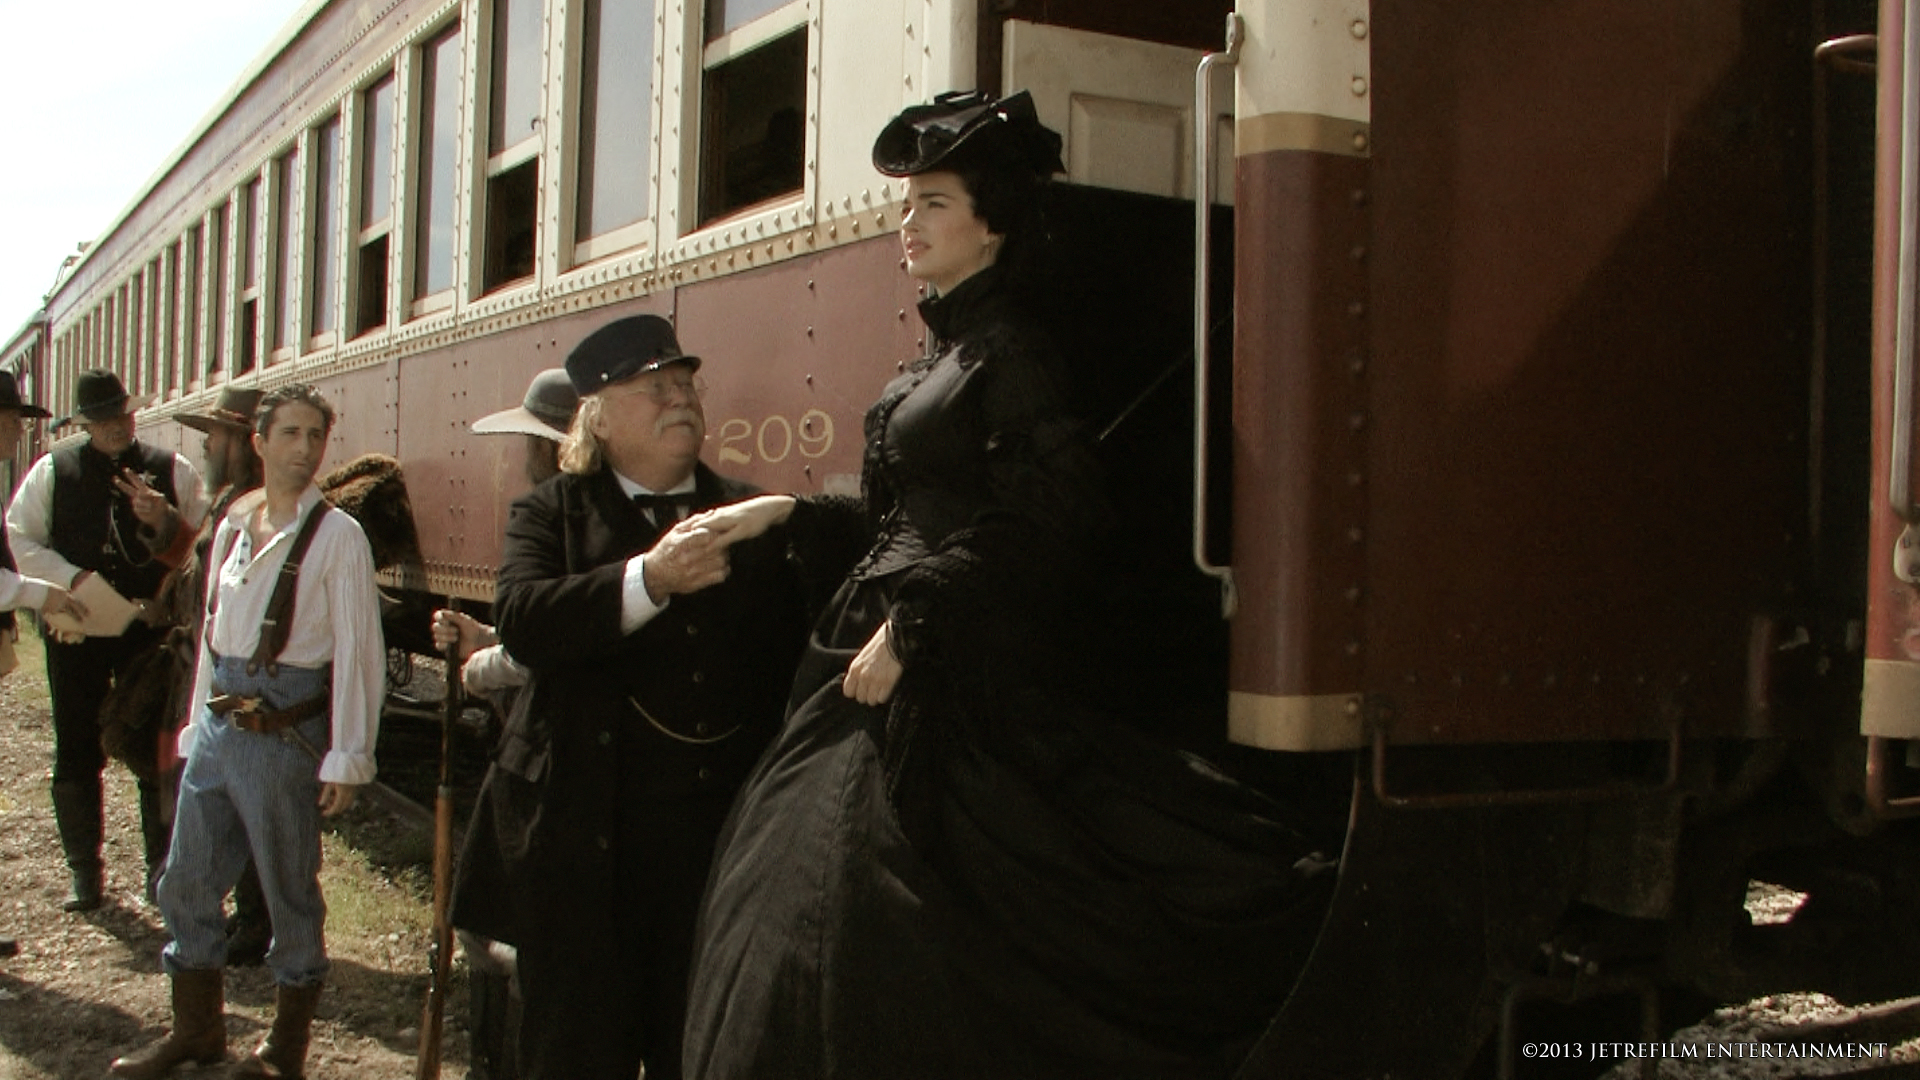 Nicole Leigh Jones steps off a train in this Grapevine-filmed scene in 